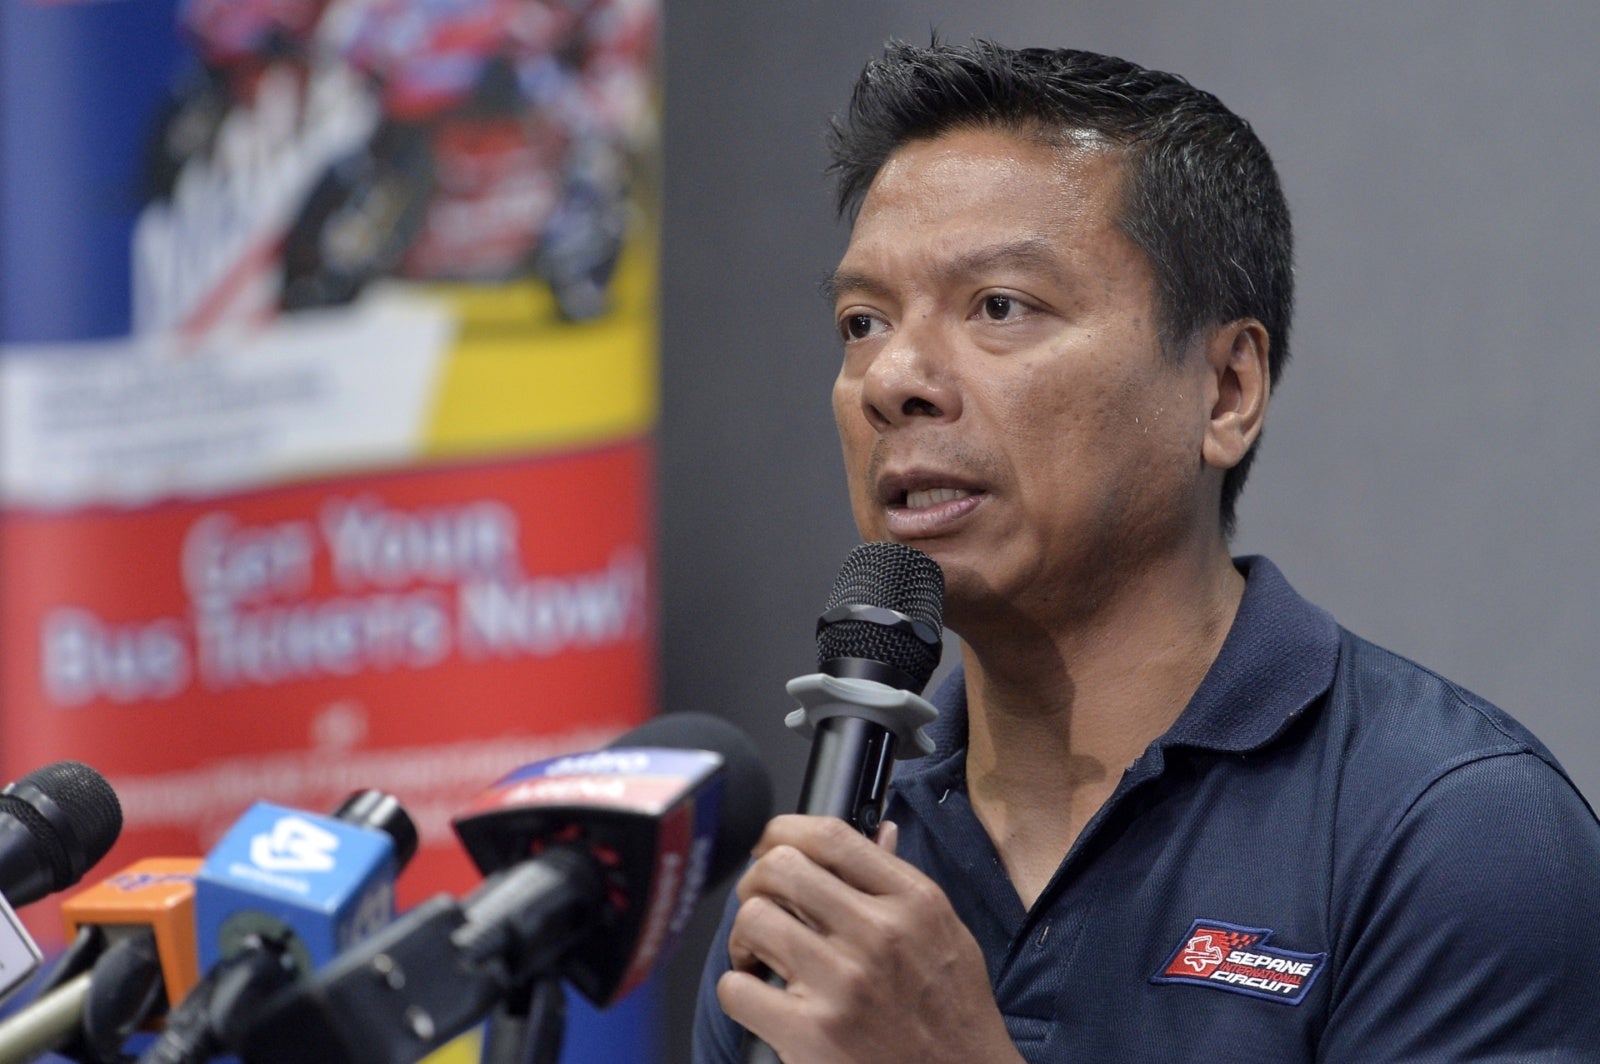 Angel Nieto And Other MotoGP Teams Were Victimized By Malaysian Thieves Giving Bad Name To The Country - WORLD OF BUZZ 3